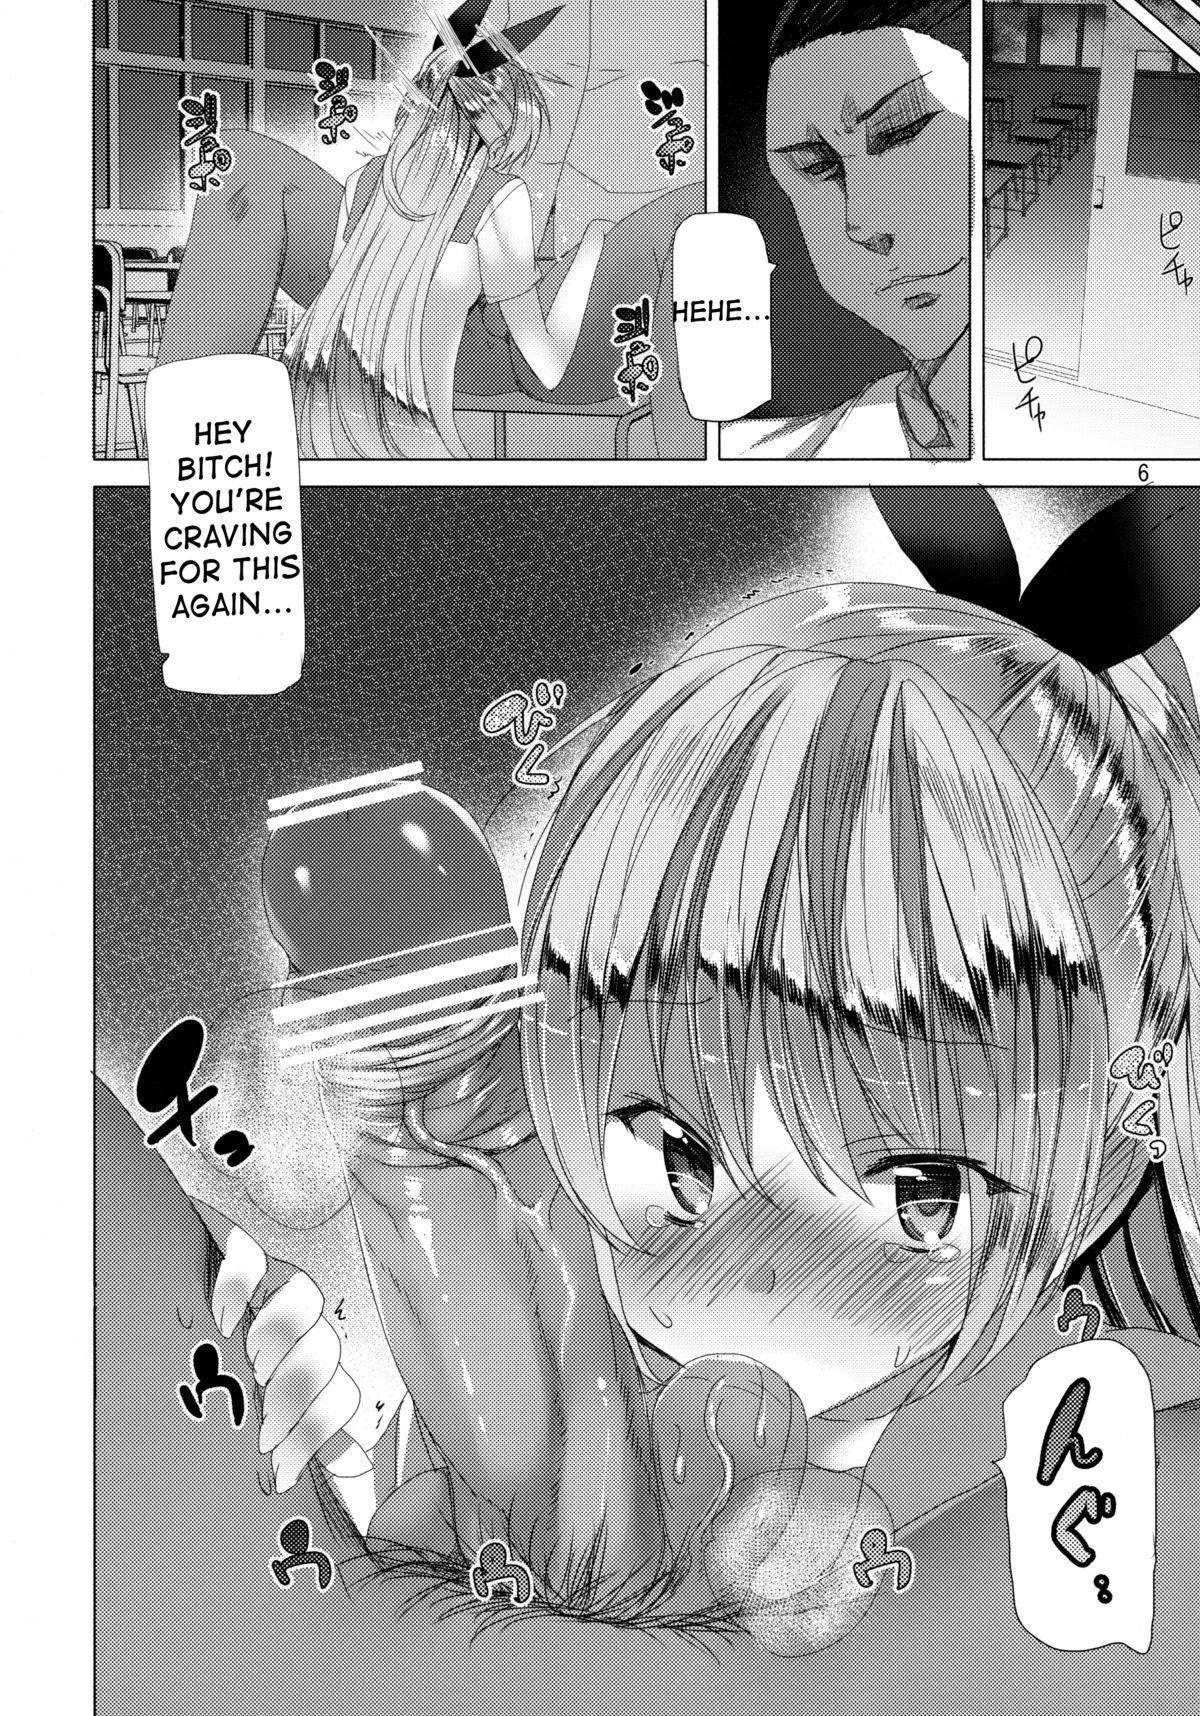 Old Vs Young Fake Lovers - Nisekoi Private Sex - Page 5